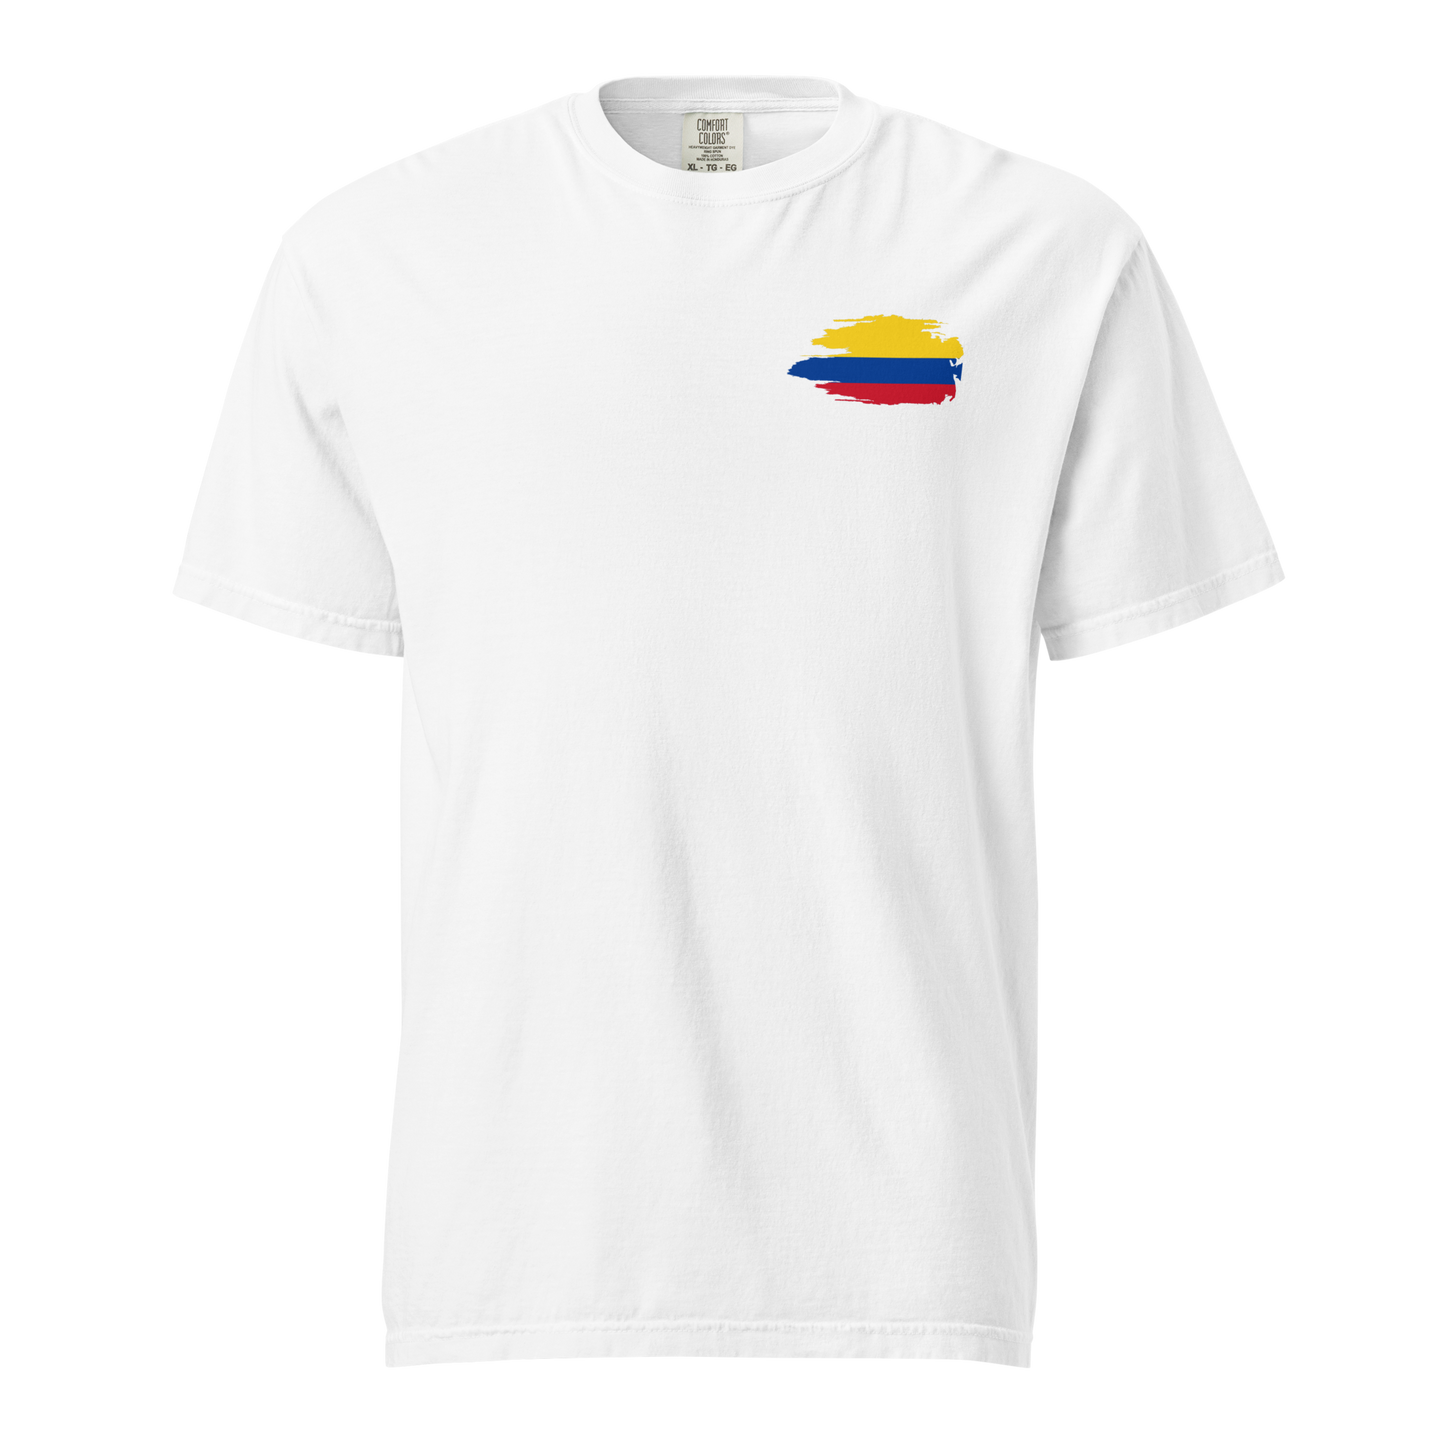 Colombian Nutrition Facts Shirt